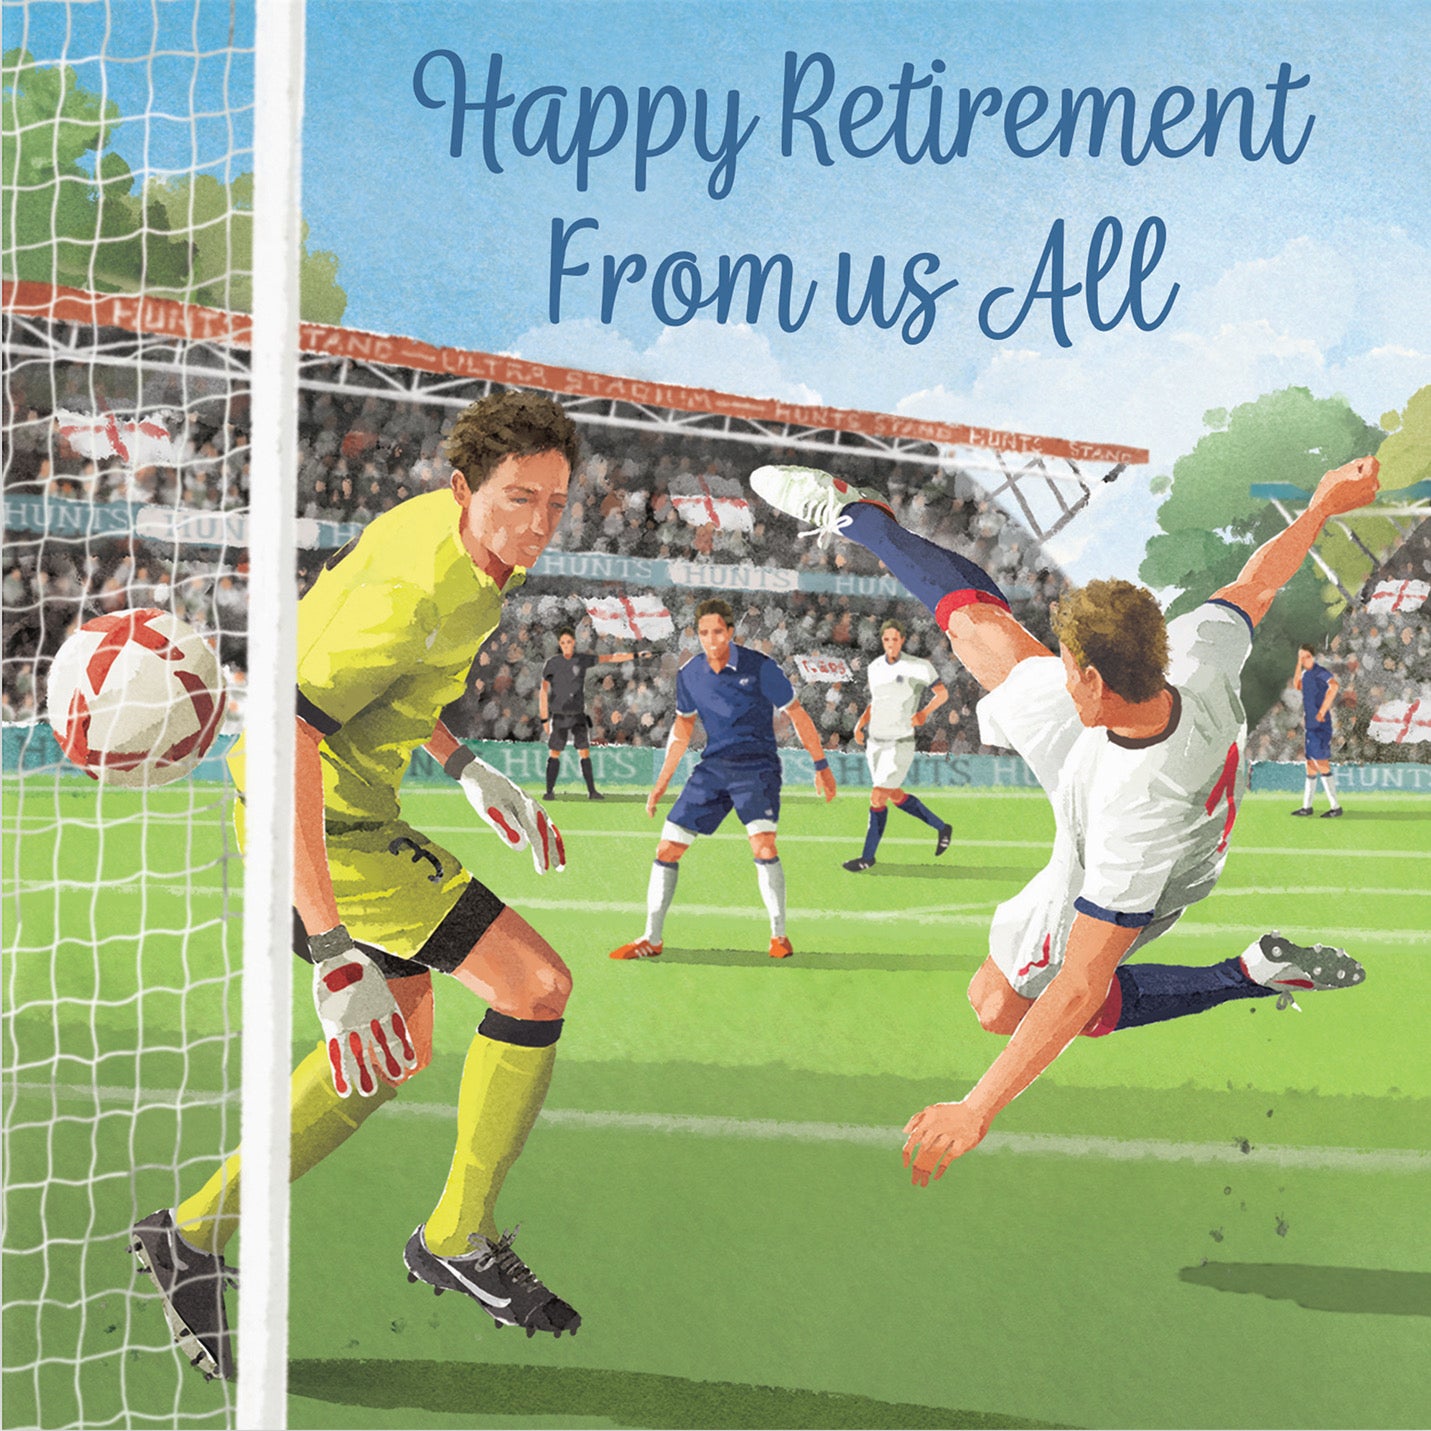 Football Retirement Card From Us All Milo's Gallery - Default Title (B0CNXY3R1C)